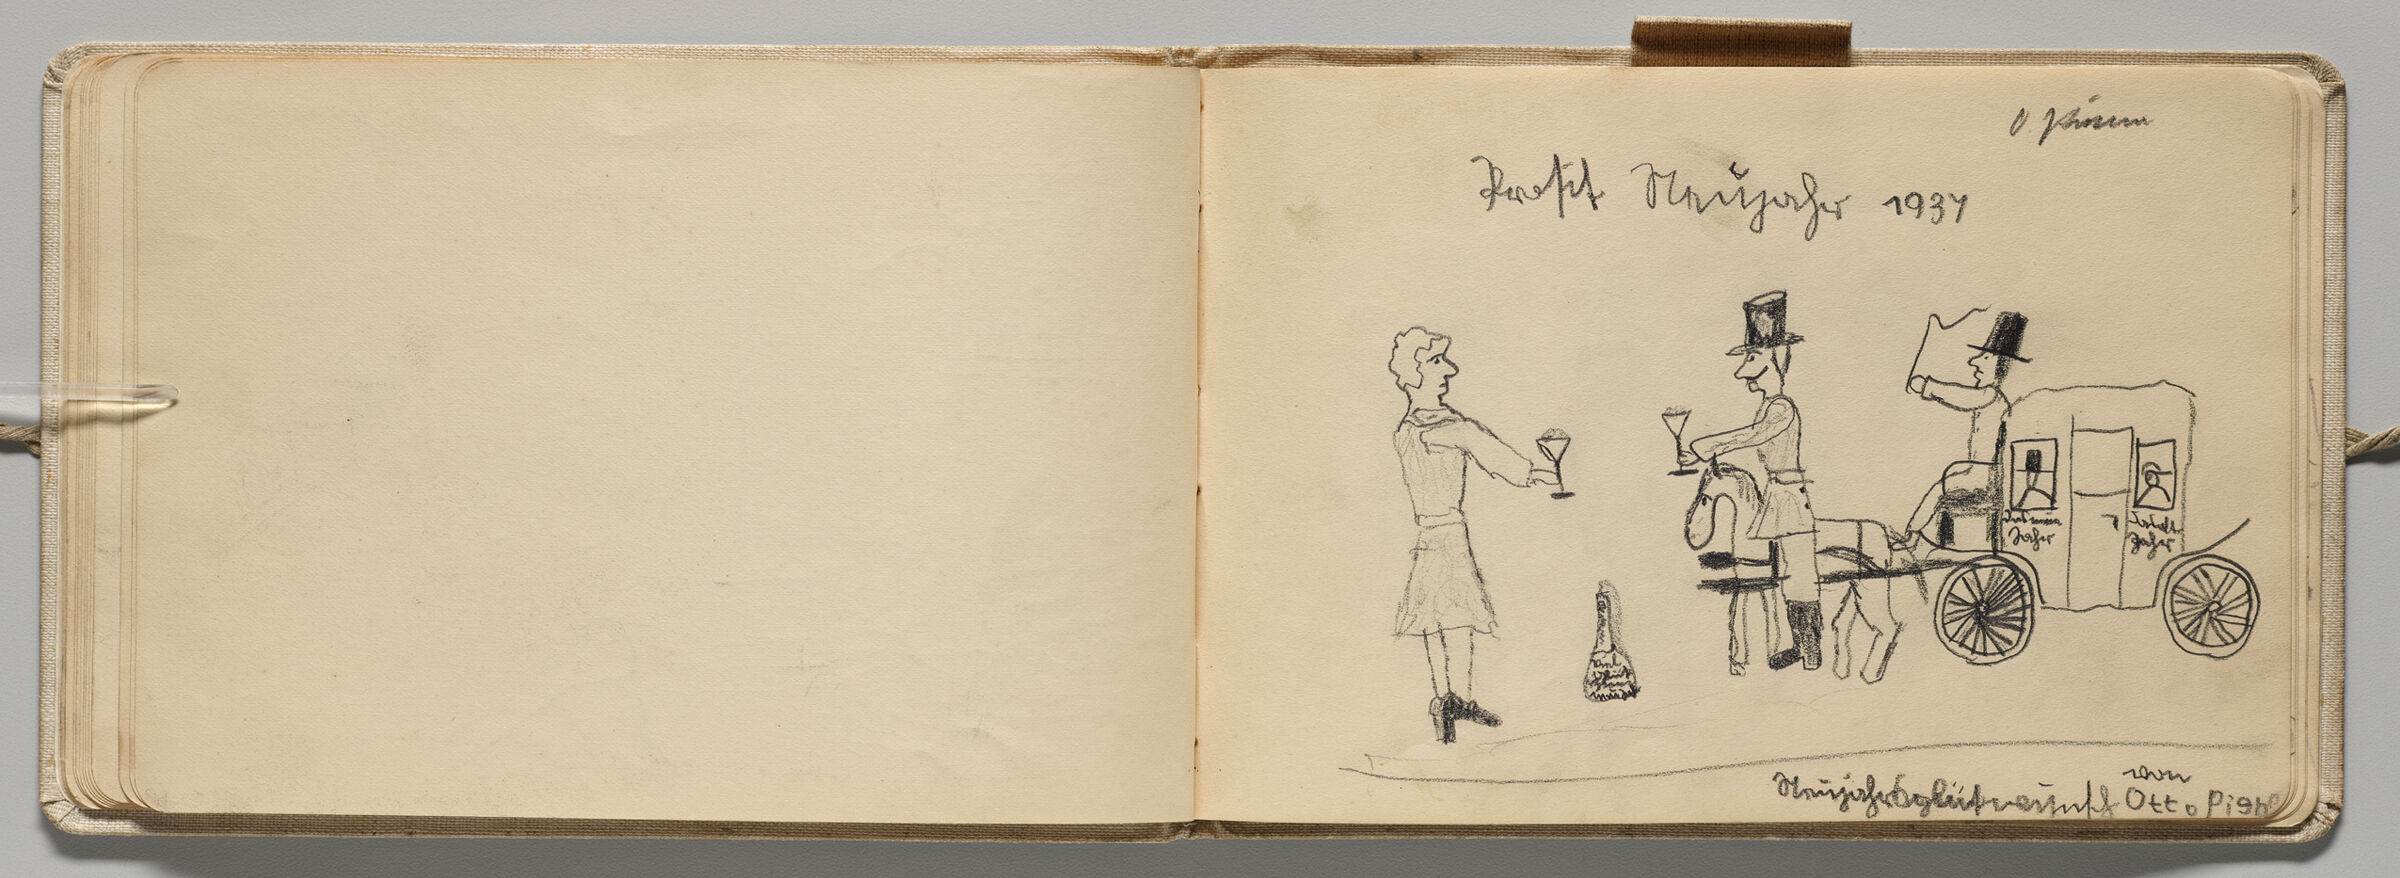 Untitled (Blank, Left Page); Untitled (Female Figure Toasting Two Male Figures On Horse-Drawn Carriage, Right Page)